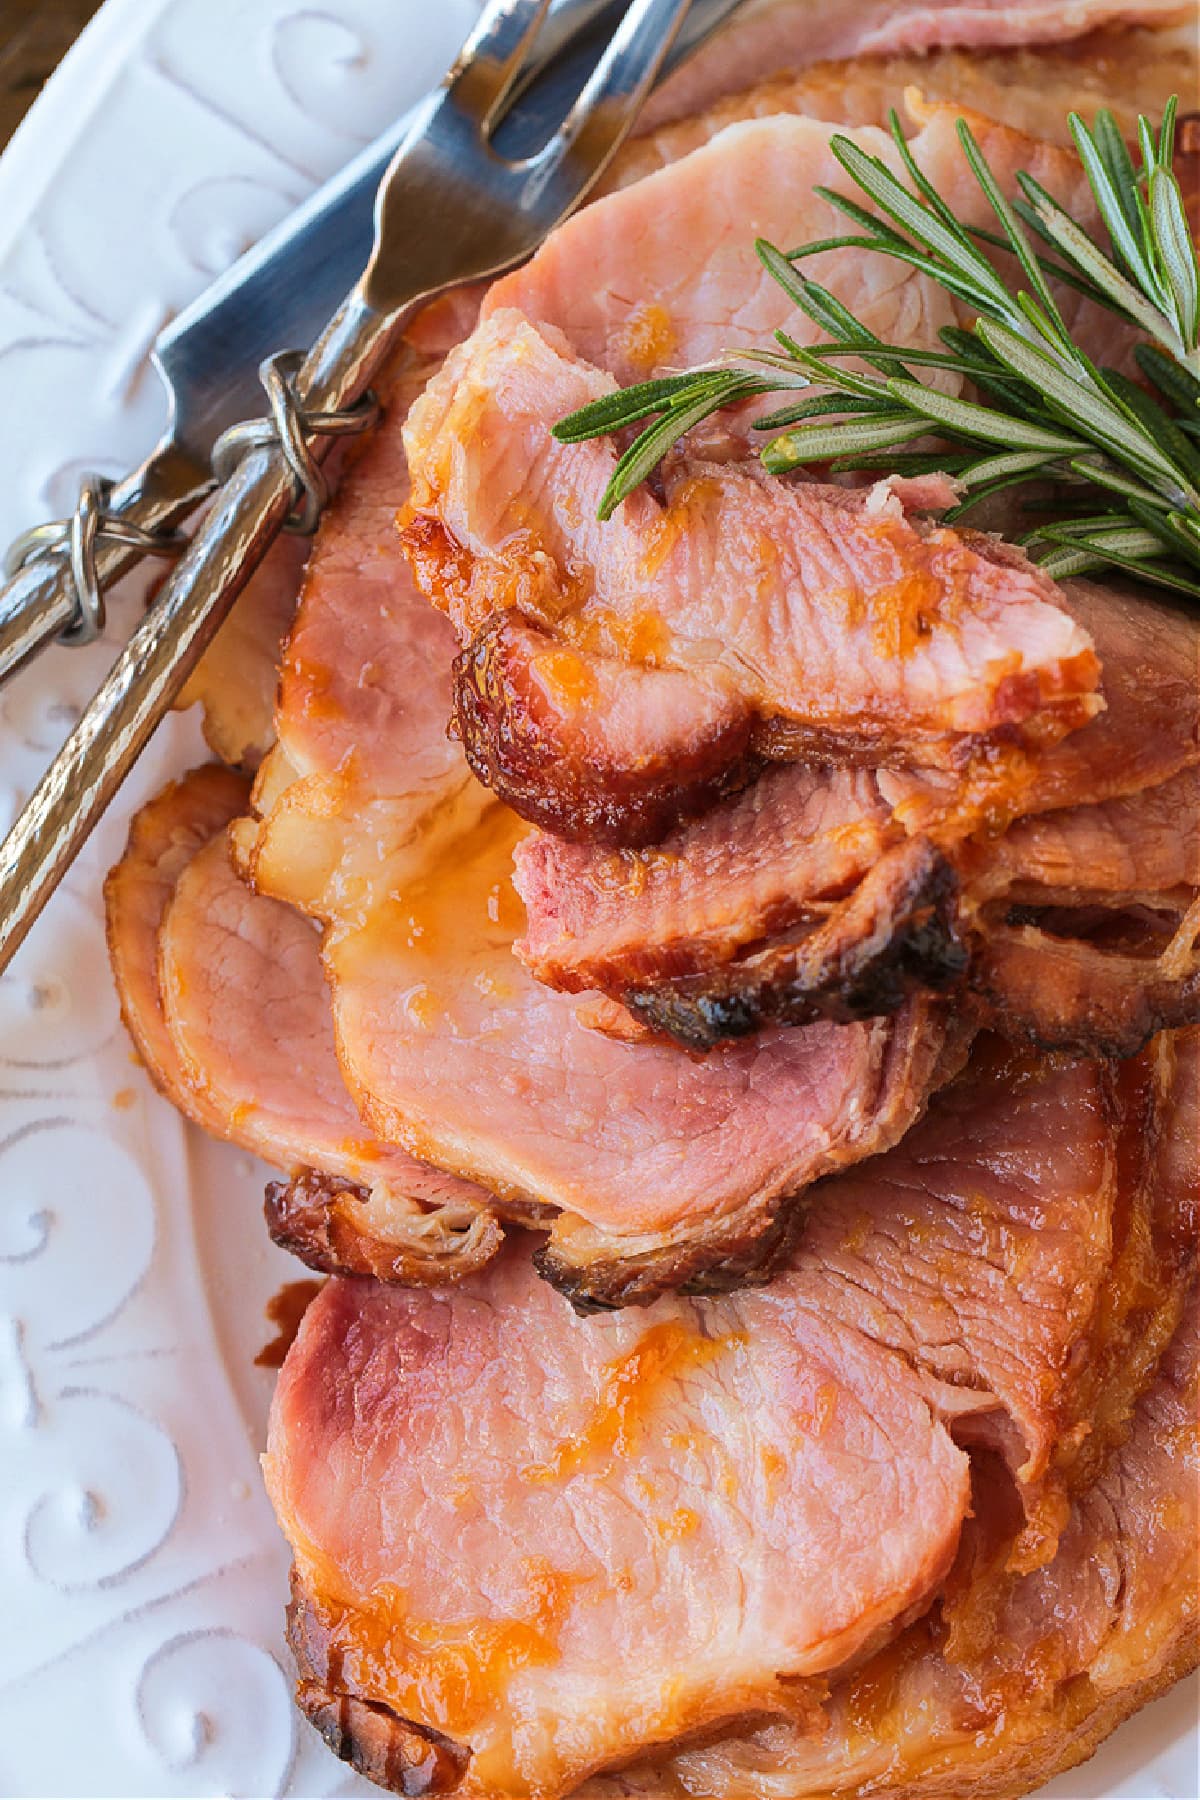 sliced, glazed ham on a serving platter with rosemary and serving fork